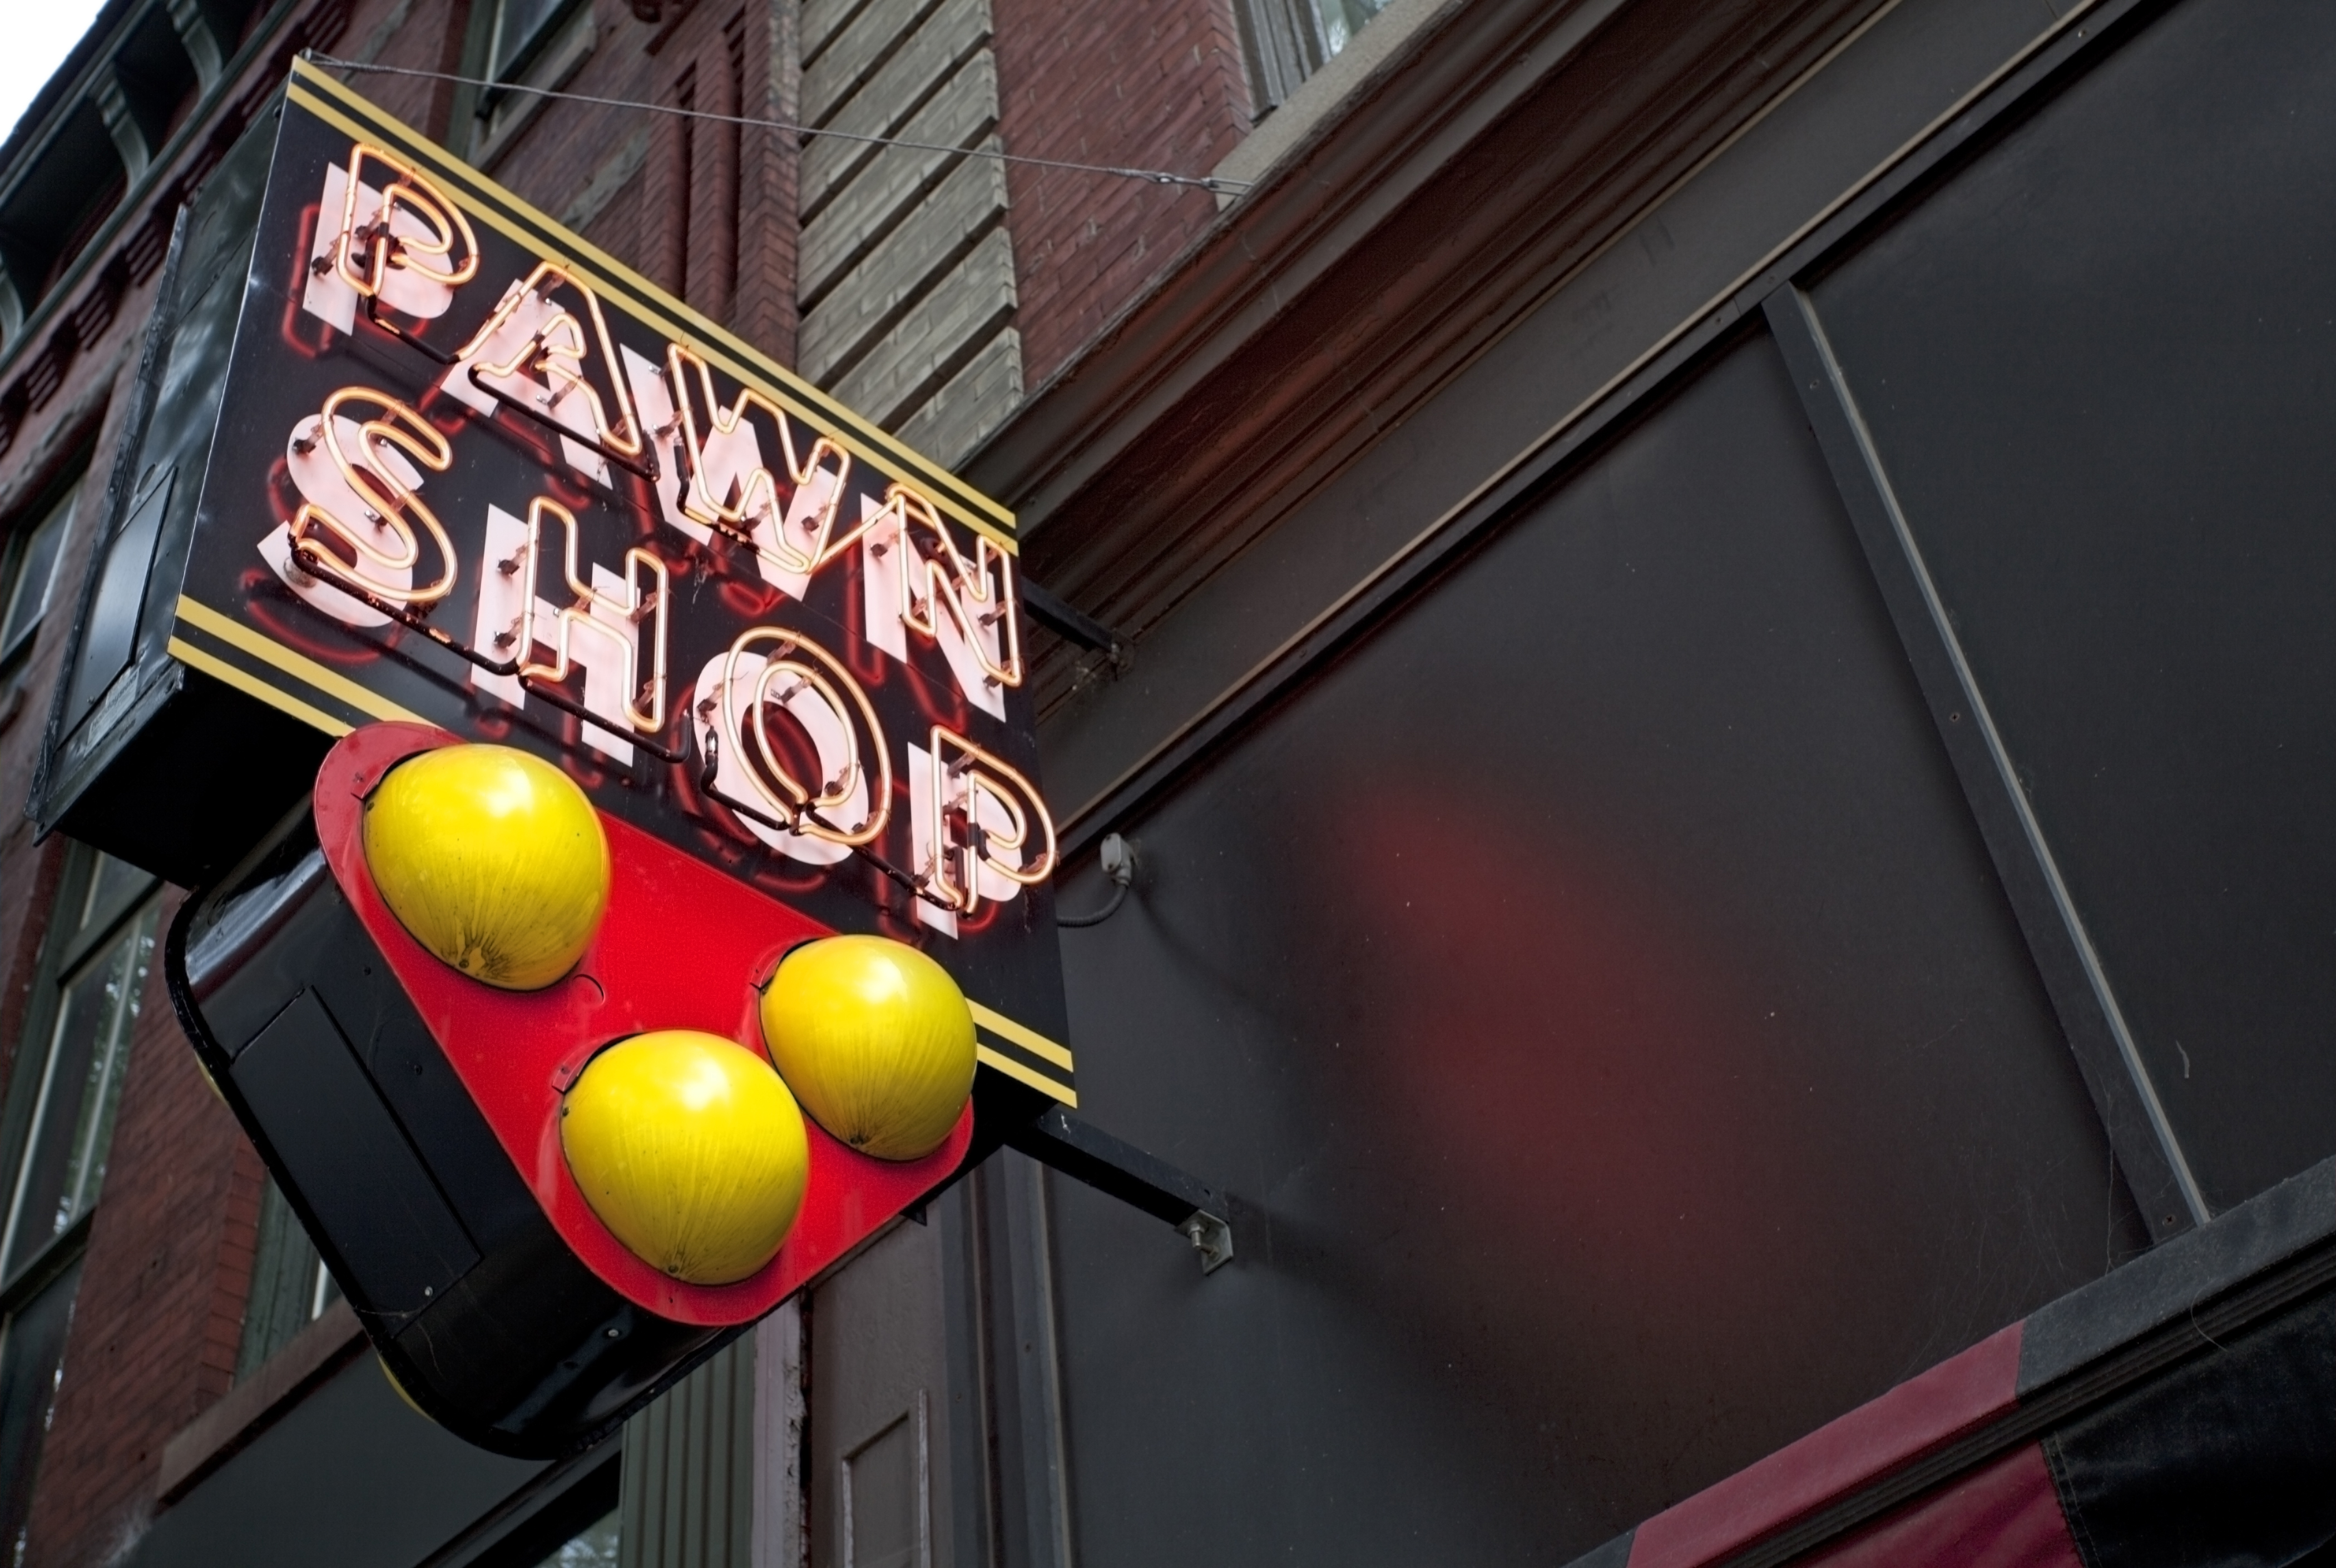 Neon pawn shop sign | Source: Shutterstock